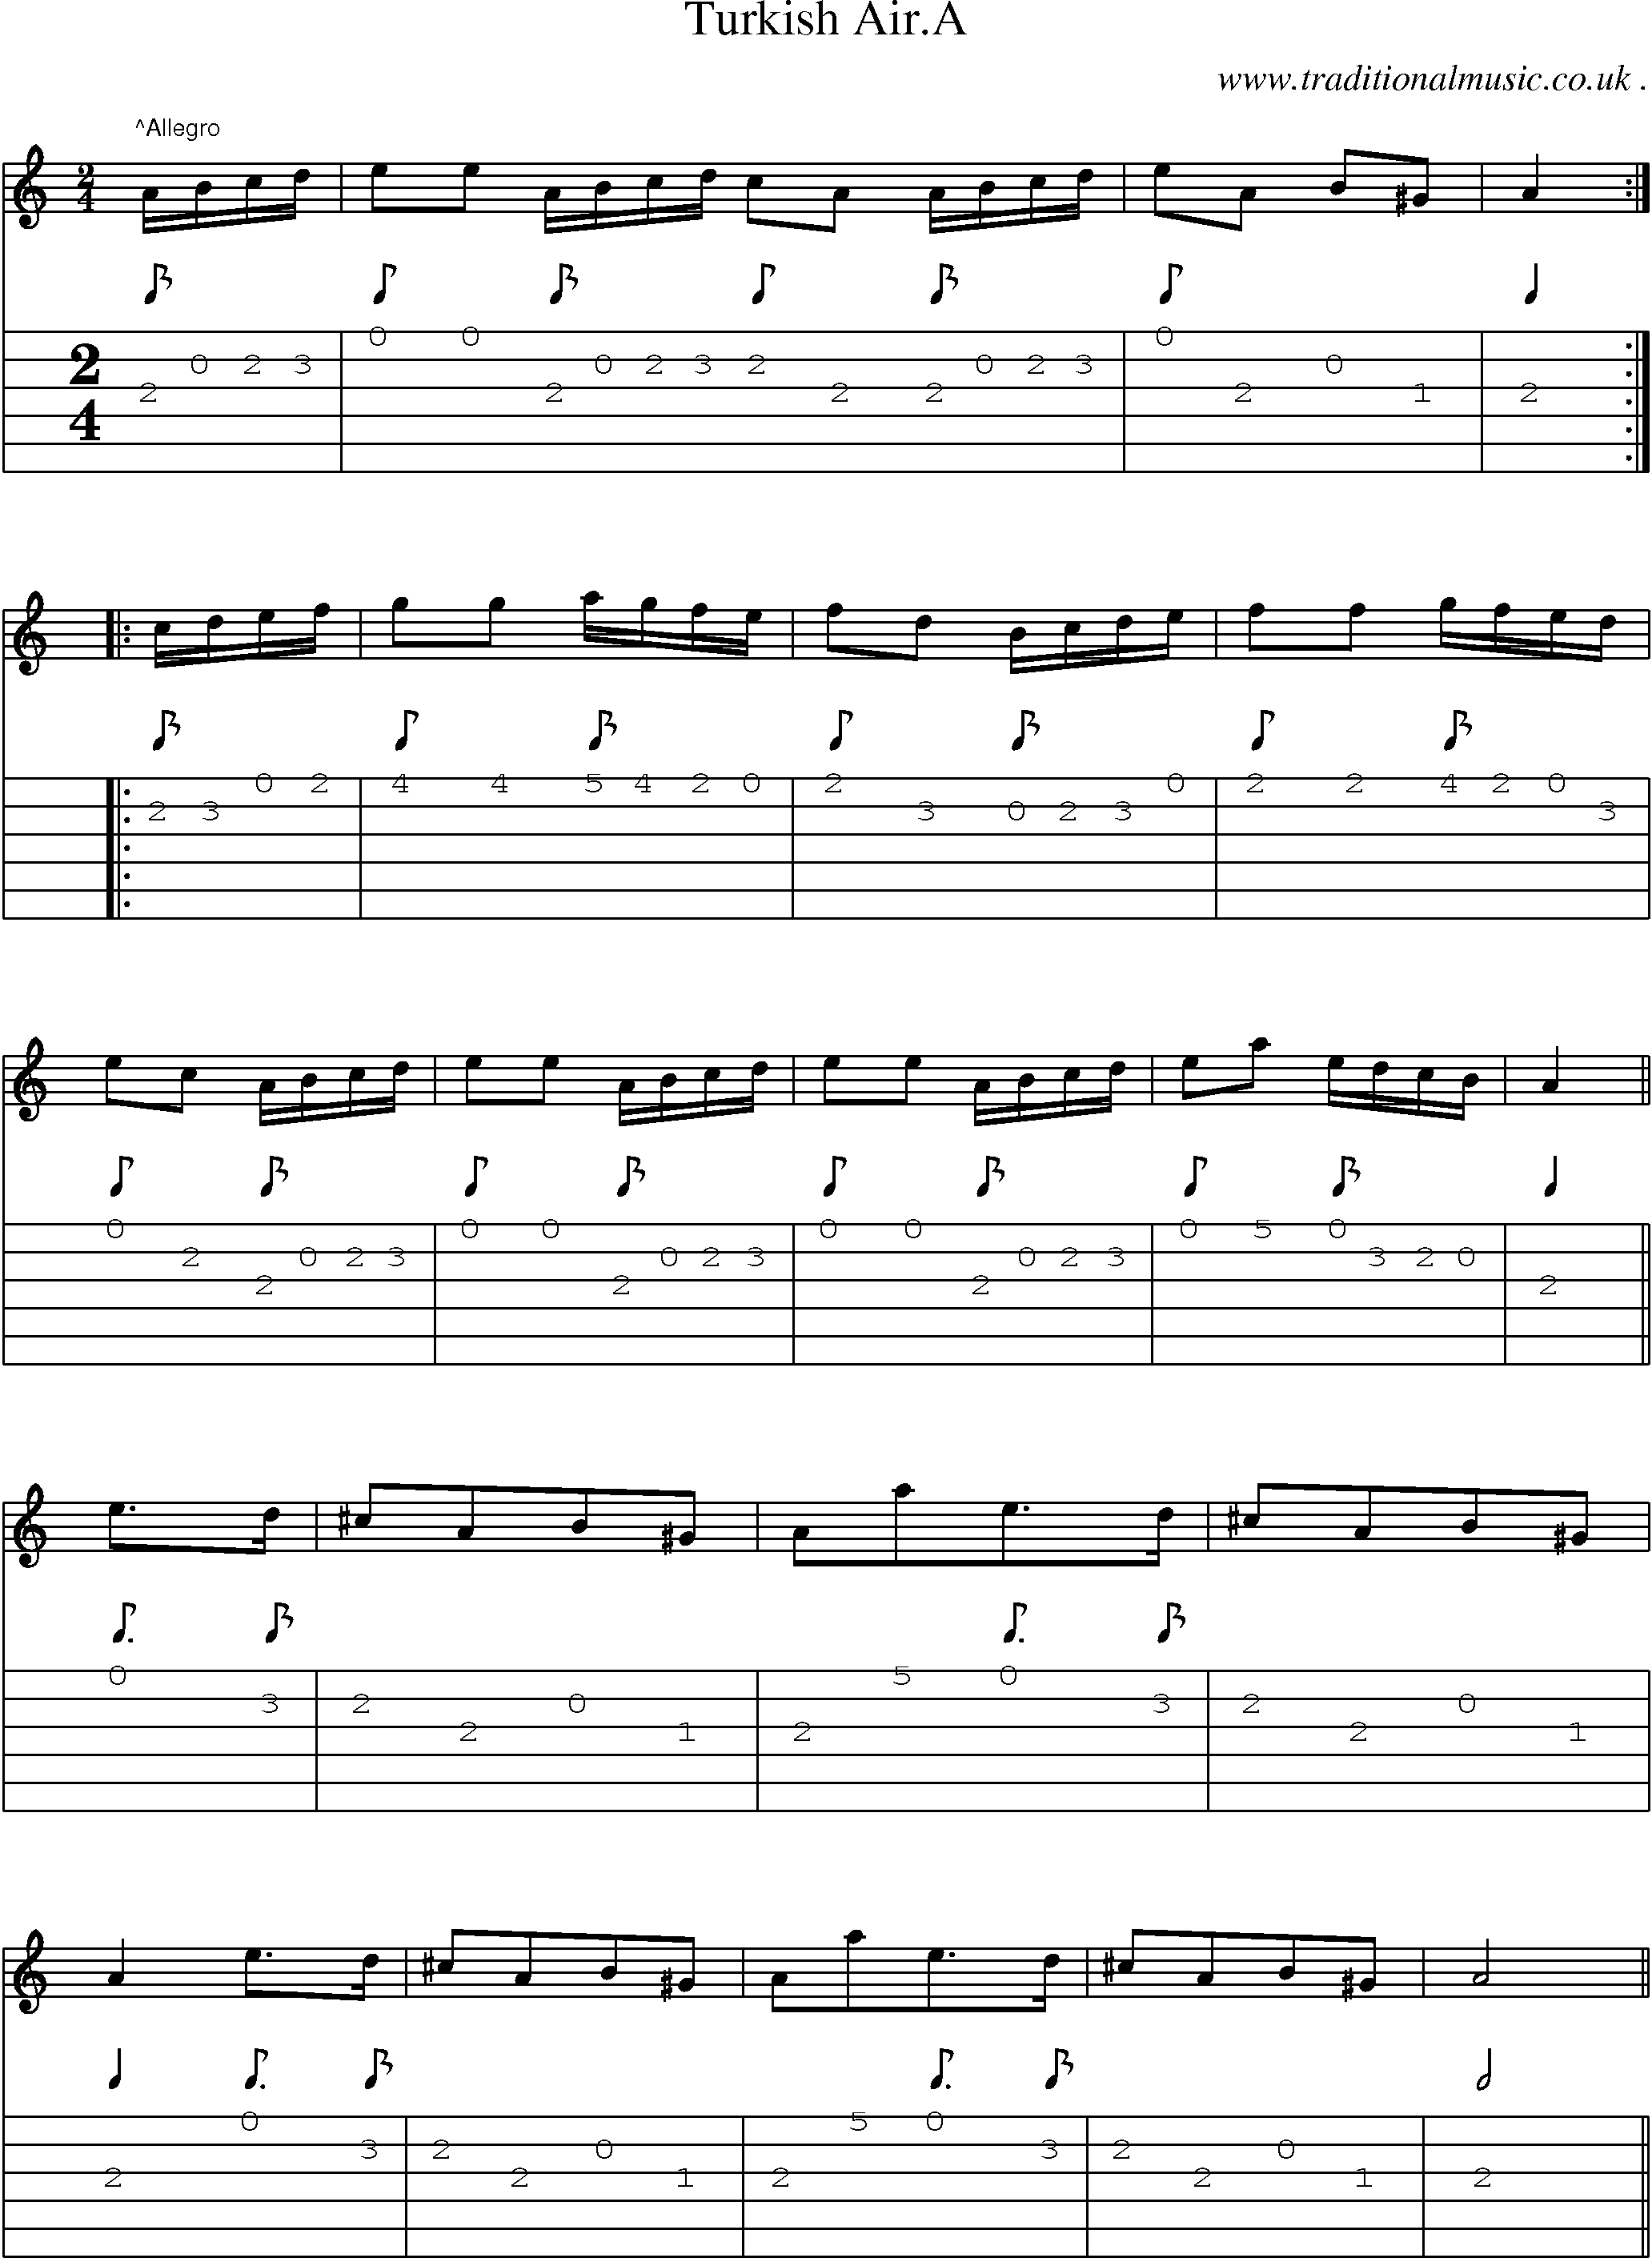 Sheet-Music and Guitar Tabs for Turkish Aira